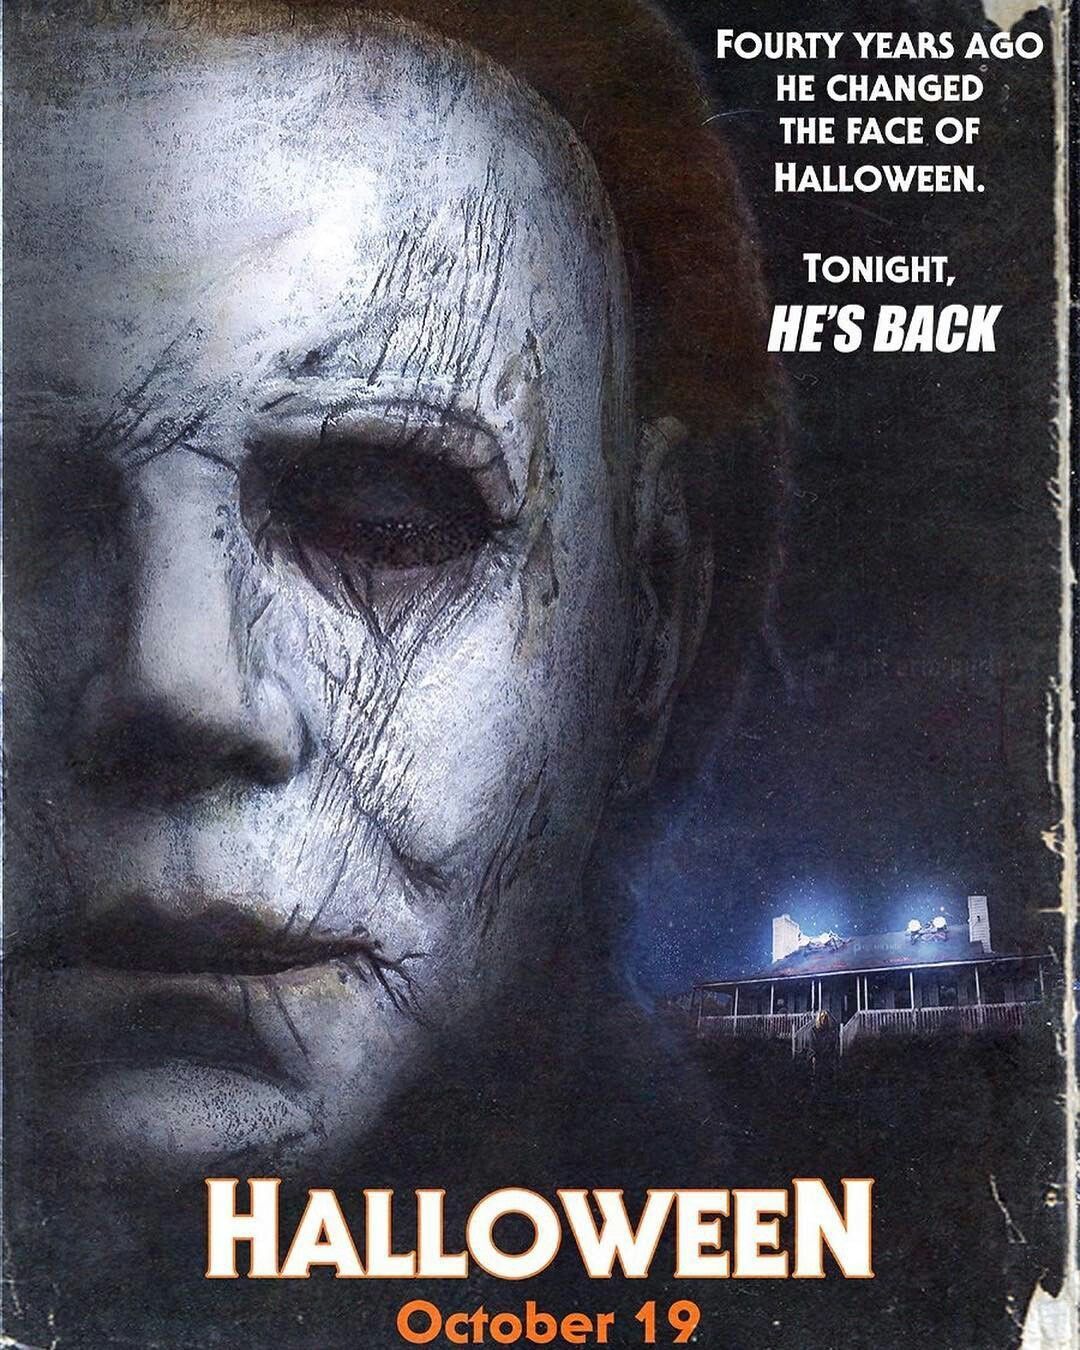 Free download Michael myers in 2019 Michael